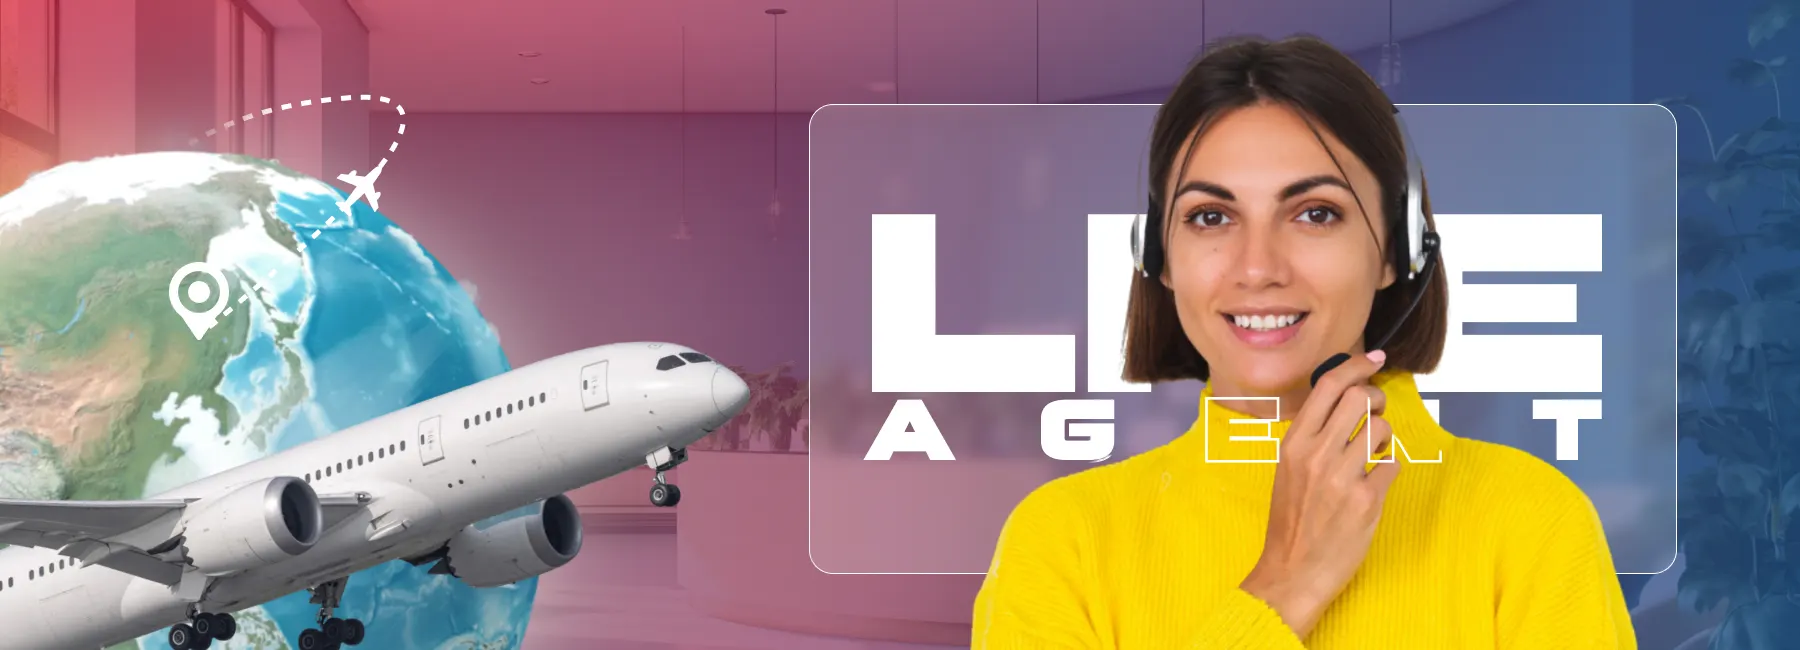 How To Talk To A Live Agent At American Airlines